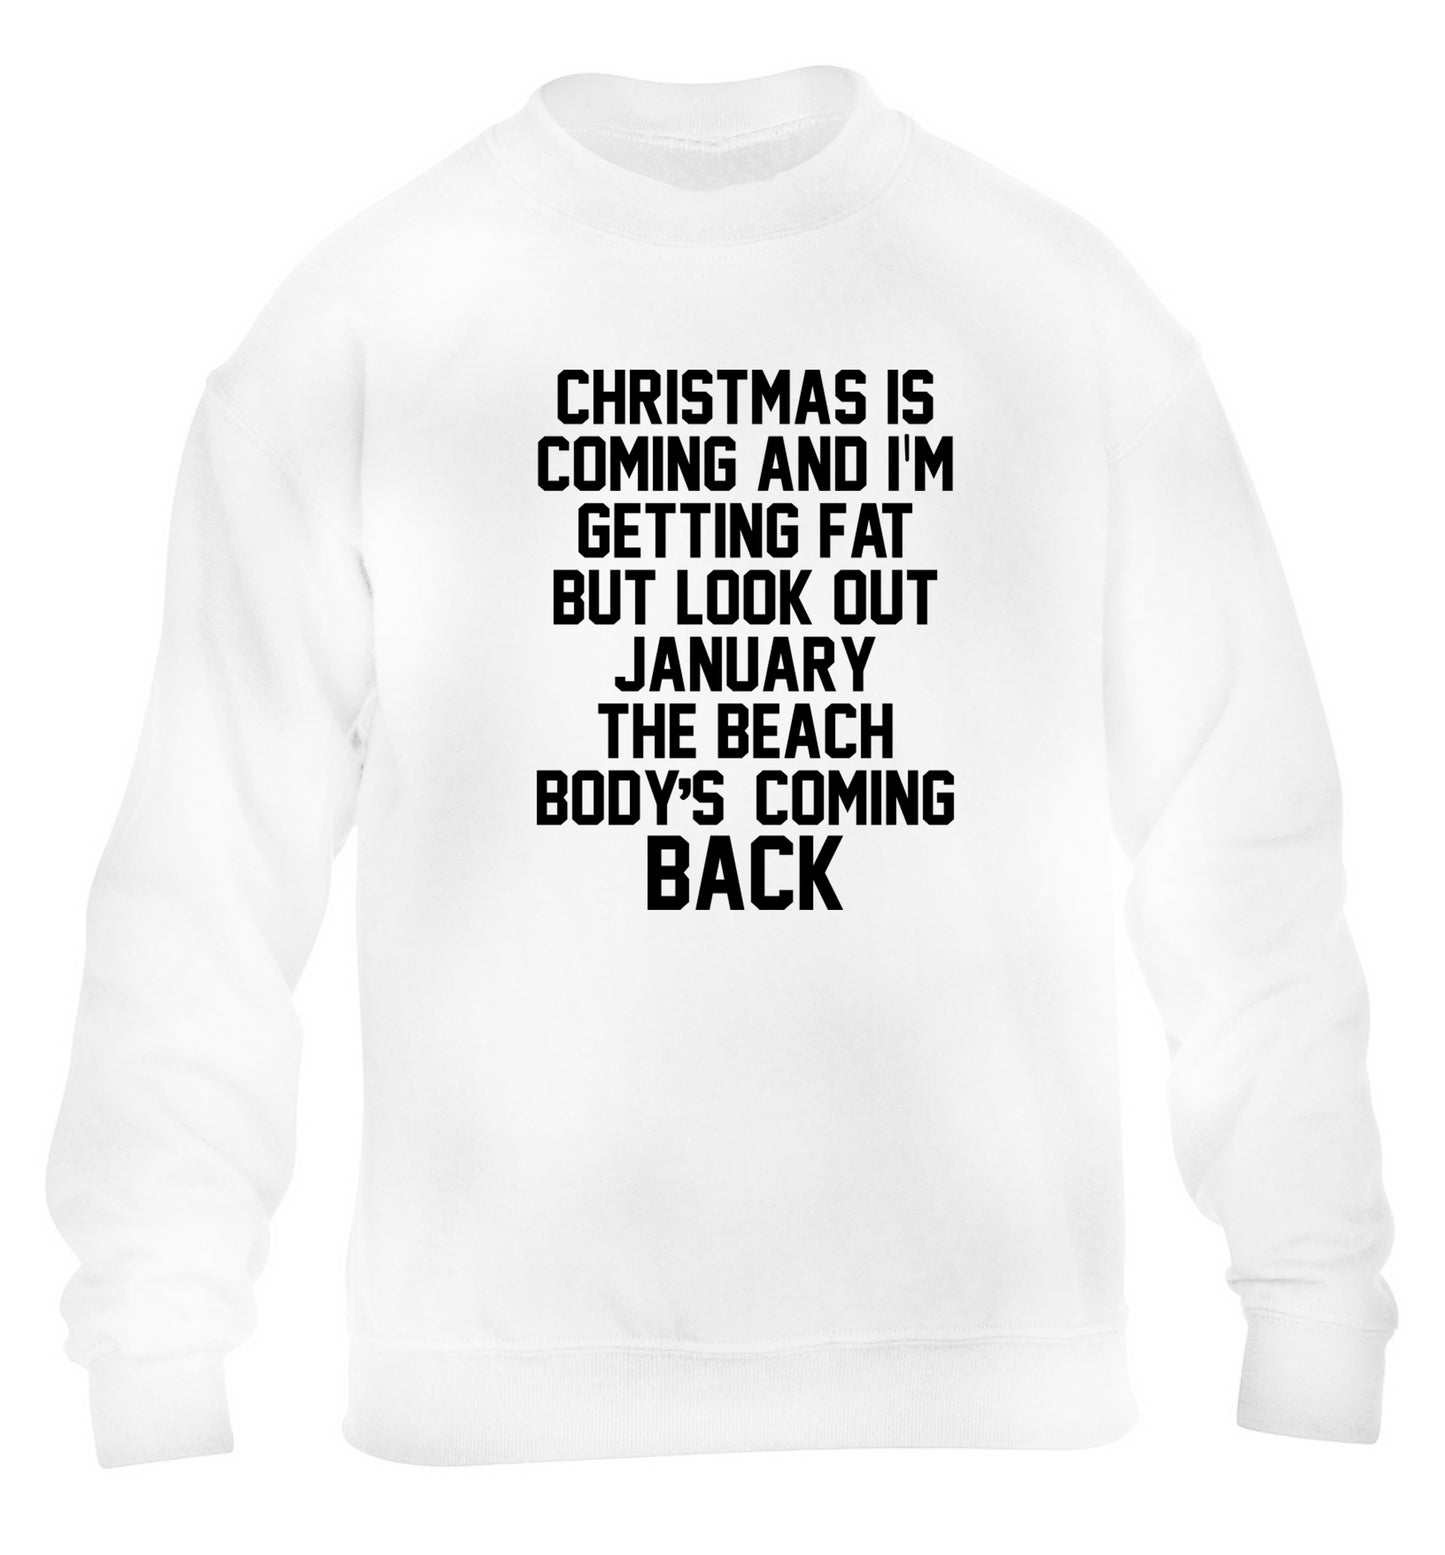 Christmas is coming and I'm getting fat but look out January the beach body's coming back! children's white sweater 12-14 Years